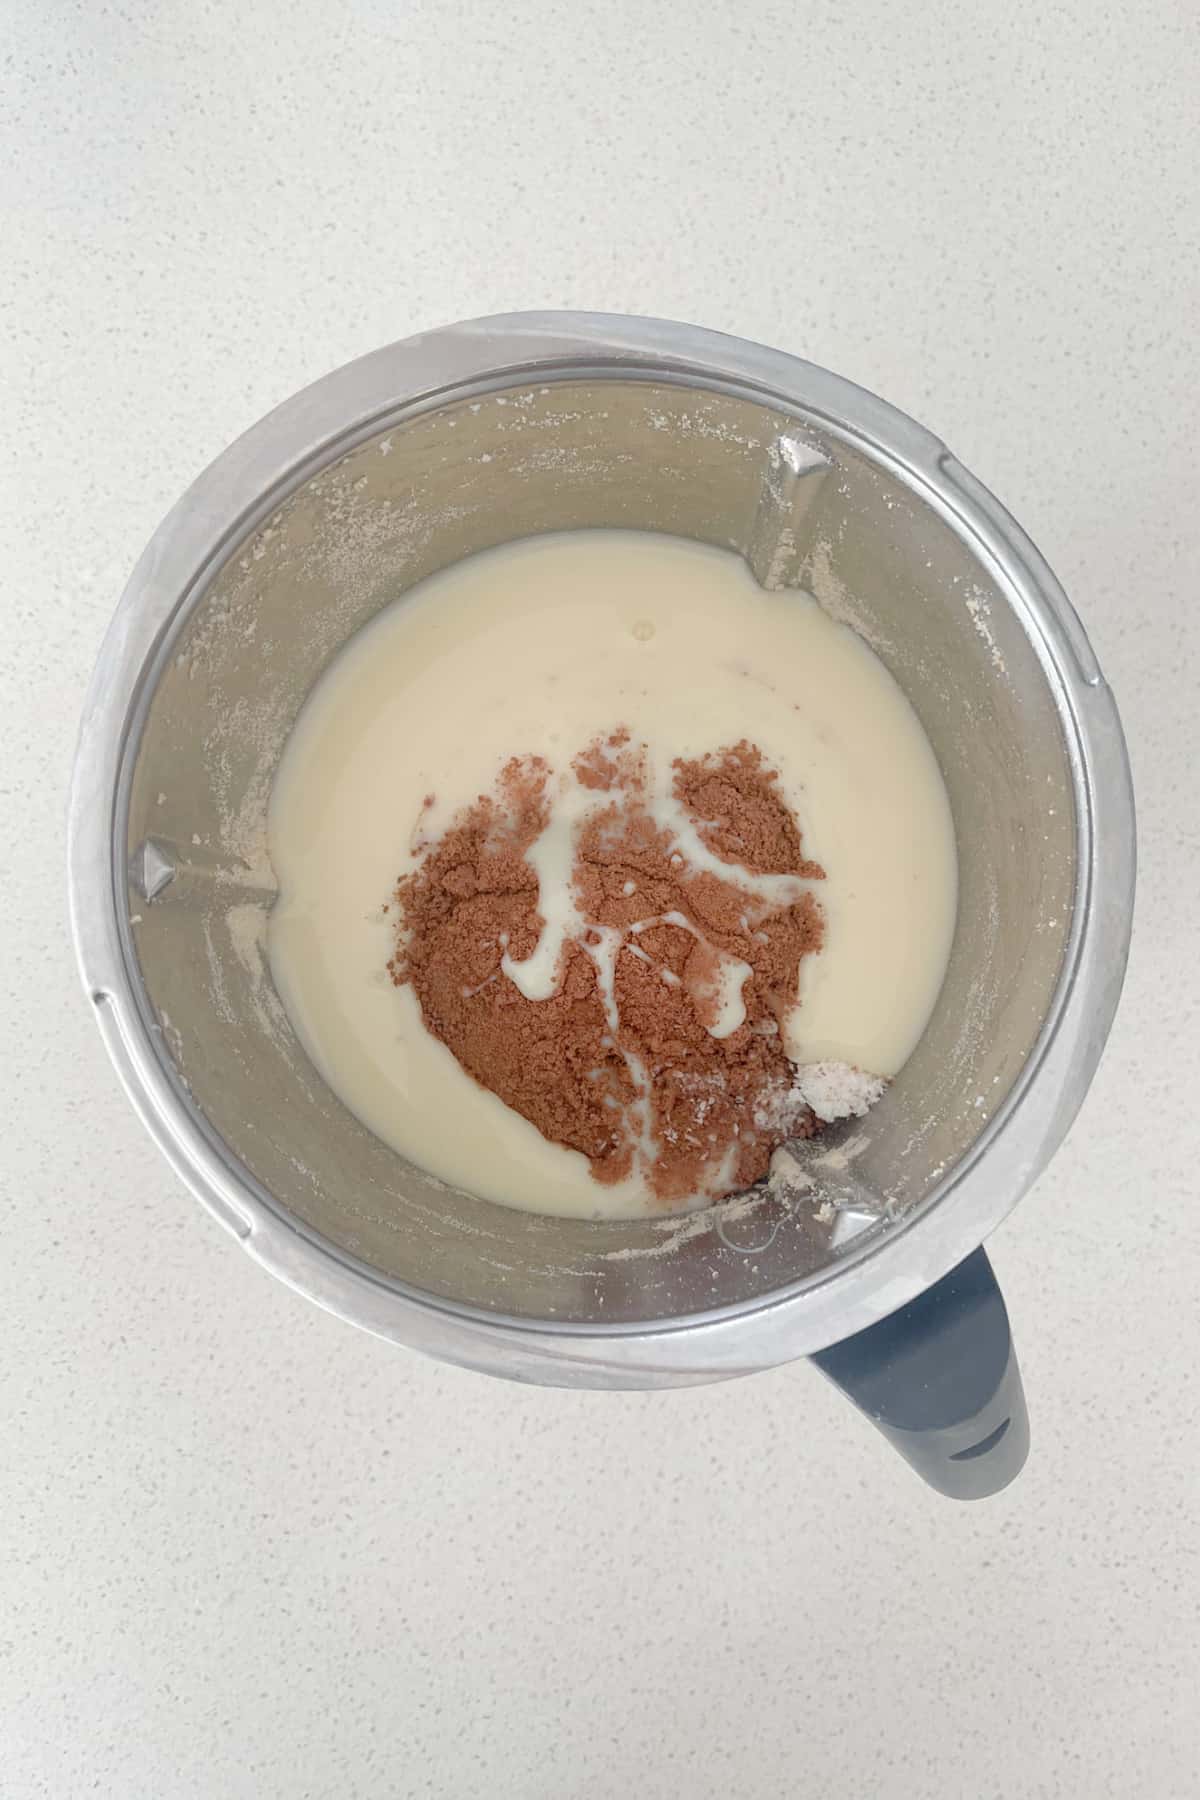 Milo Ball ingredients in a thermomix bowl before being combined.